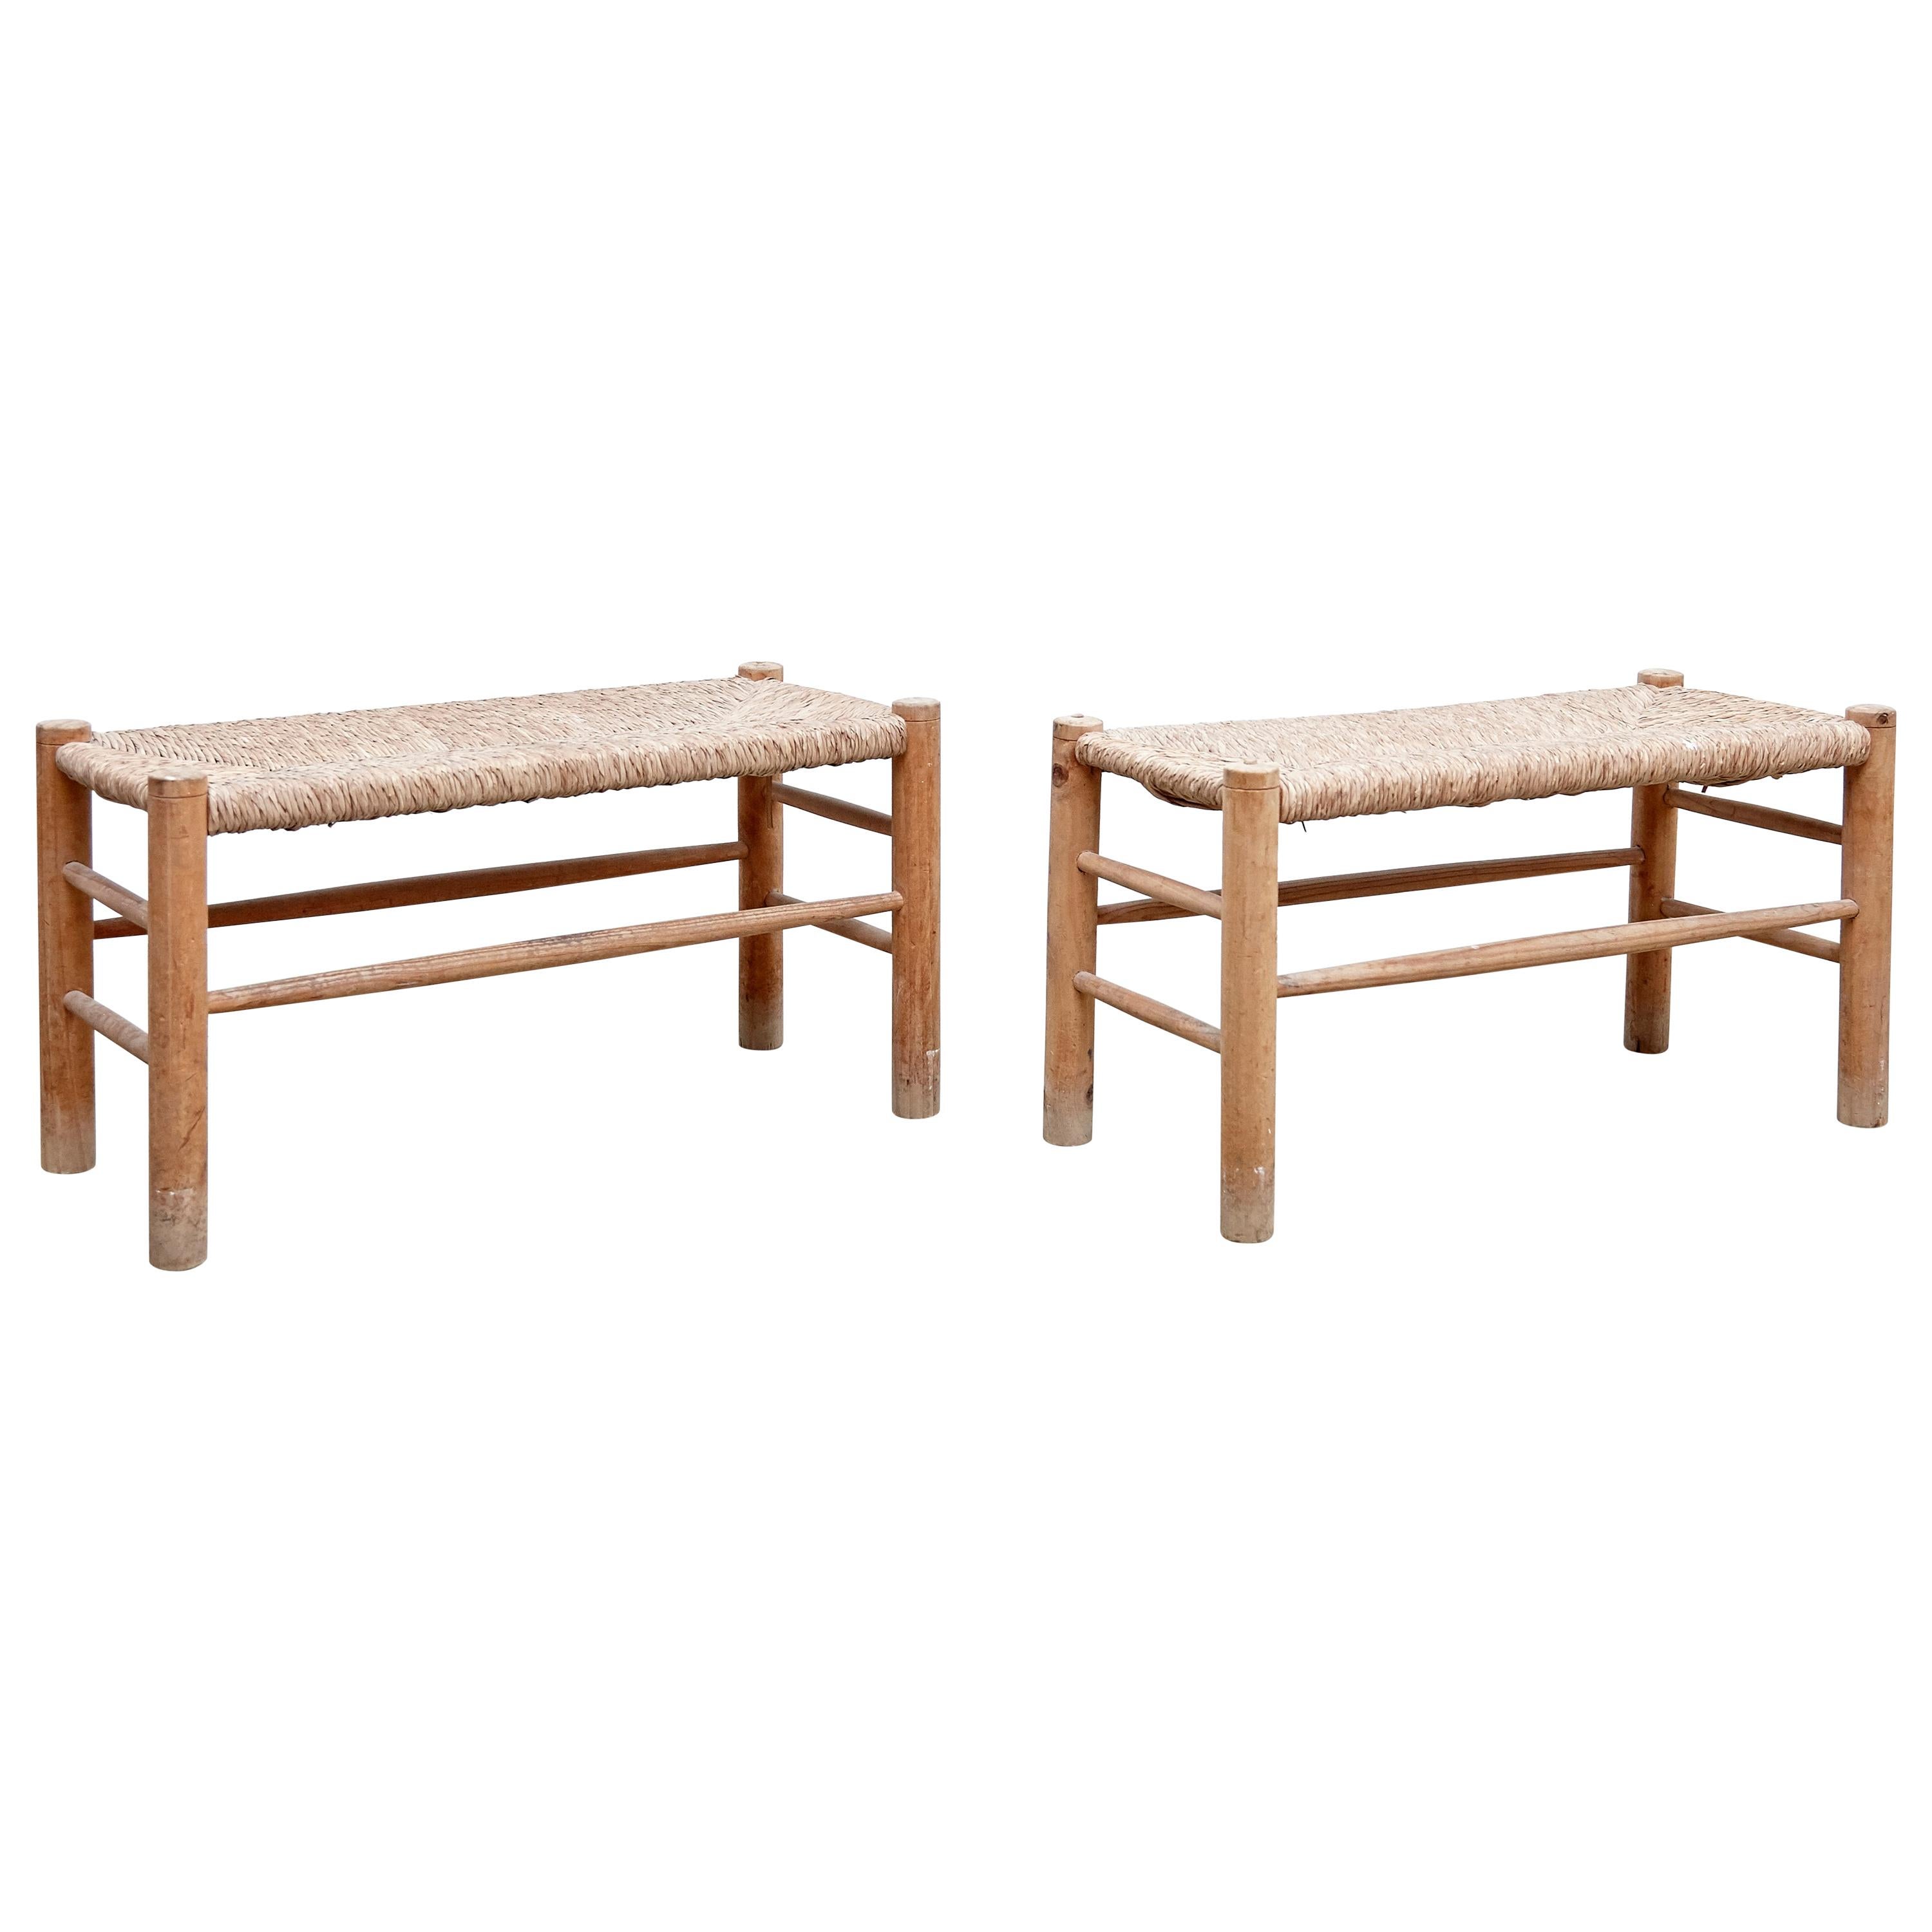 Pair of Bench in the Style of Charlotte Perriand, circa 1960